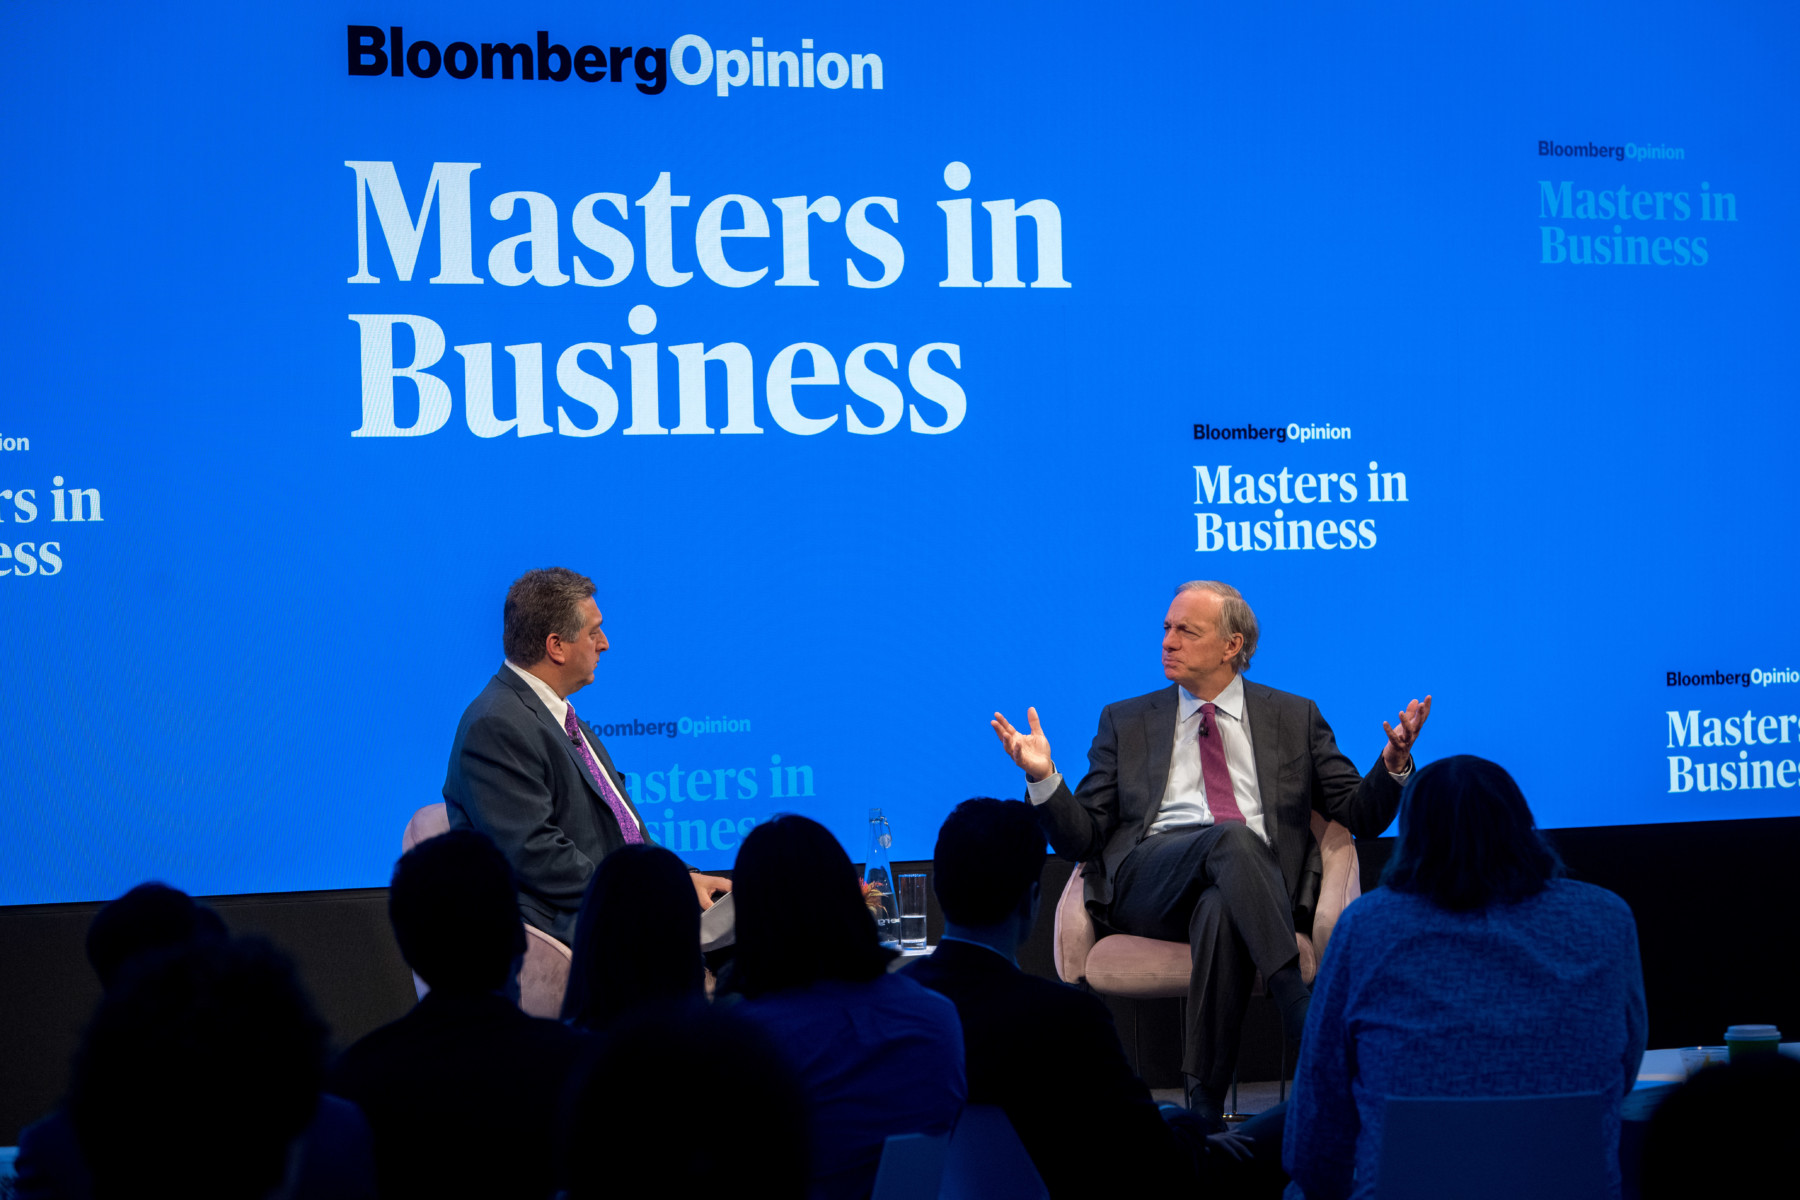 Round Up: MIB Live with Ray Dalio - The Big Picture